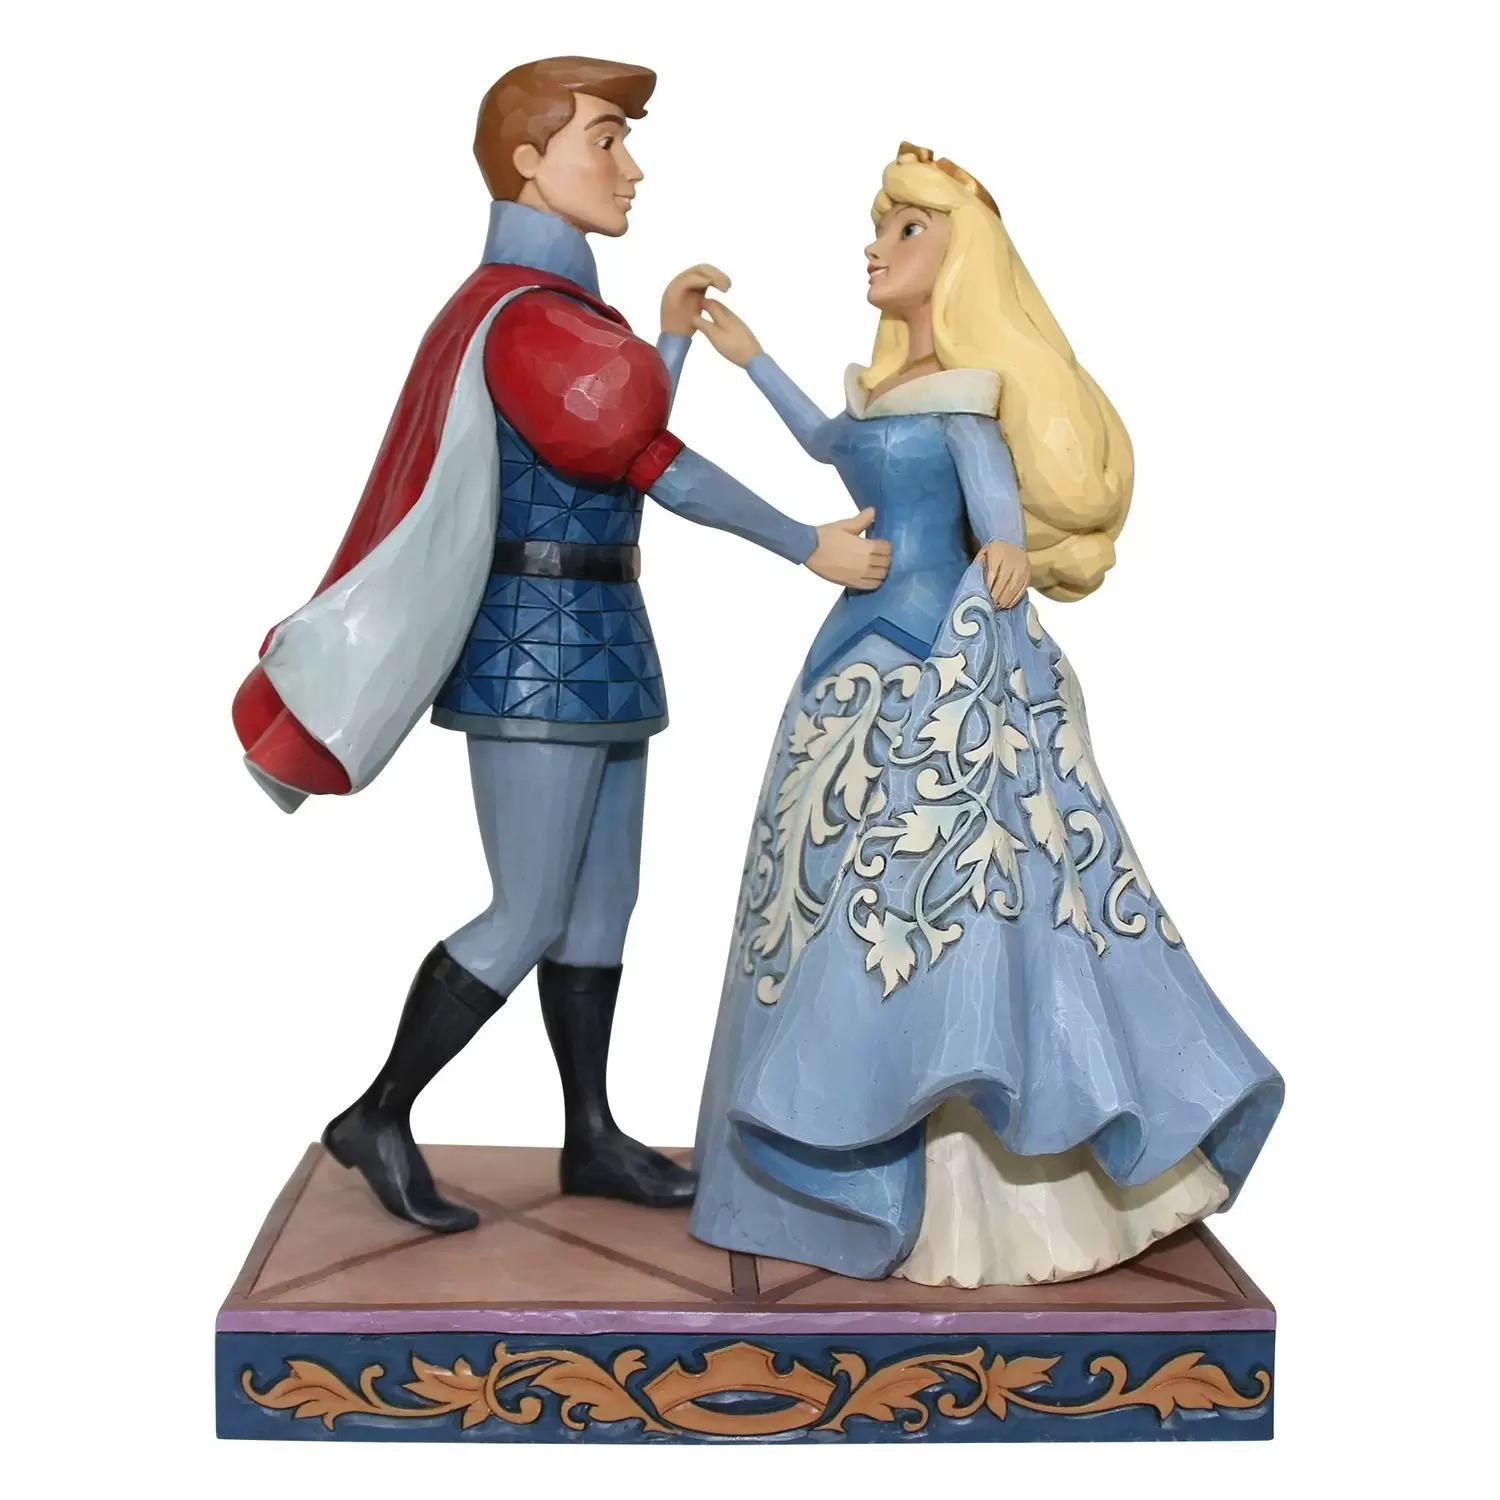 Disney Traditions by Jim Shore - Swept Up in the Moment - Aurora and Prince Dancing